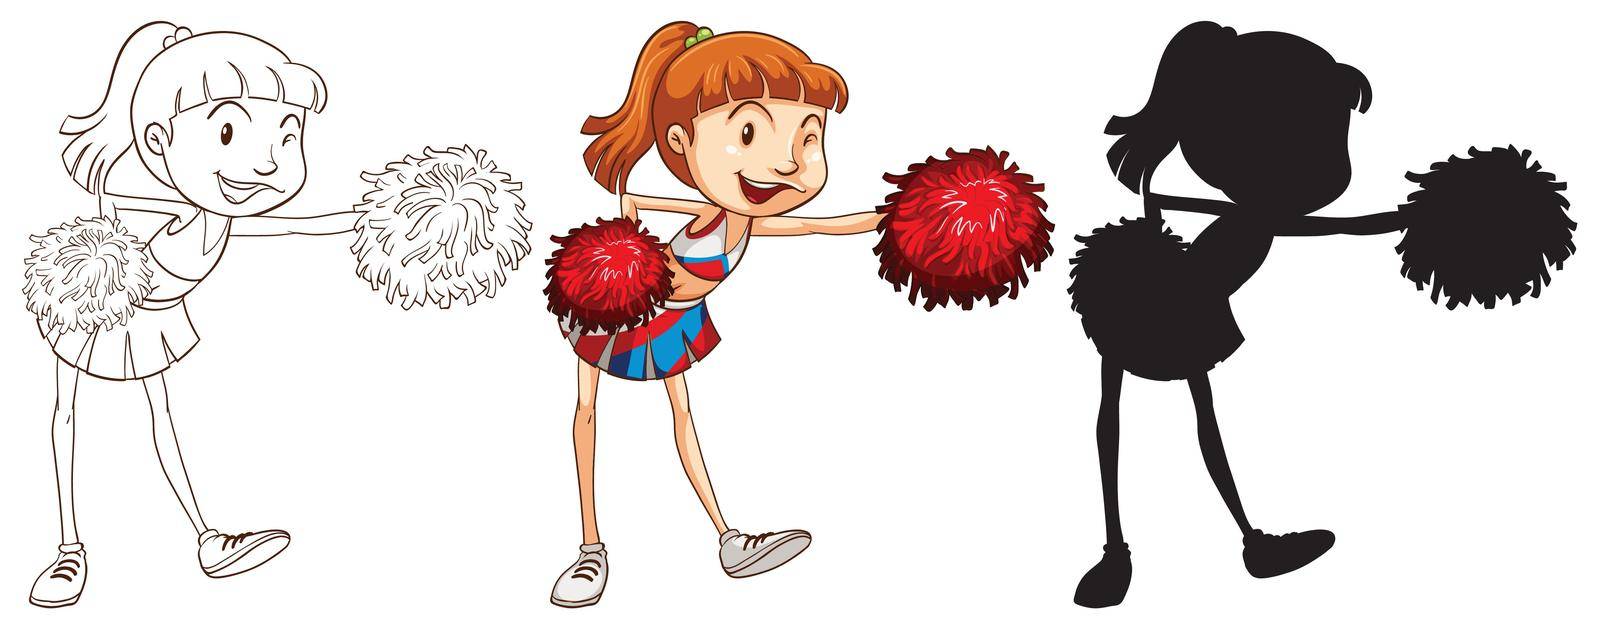 Illustration of different drawing of a cheerleader